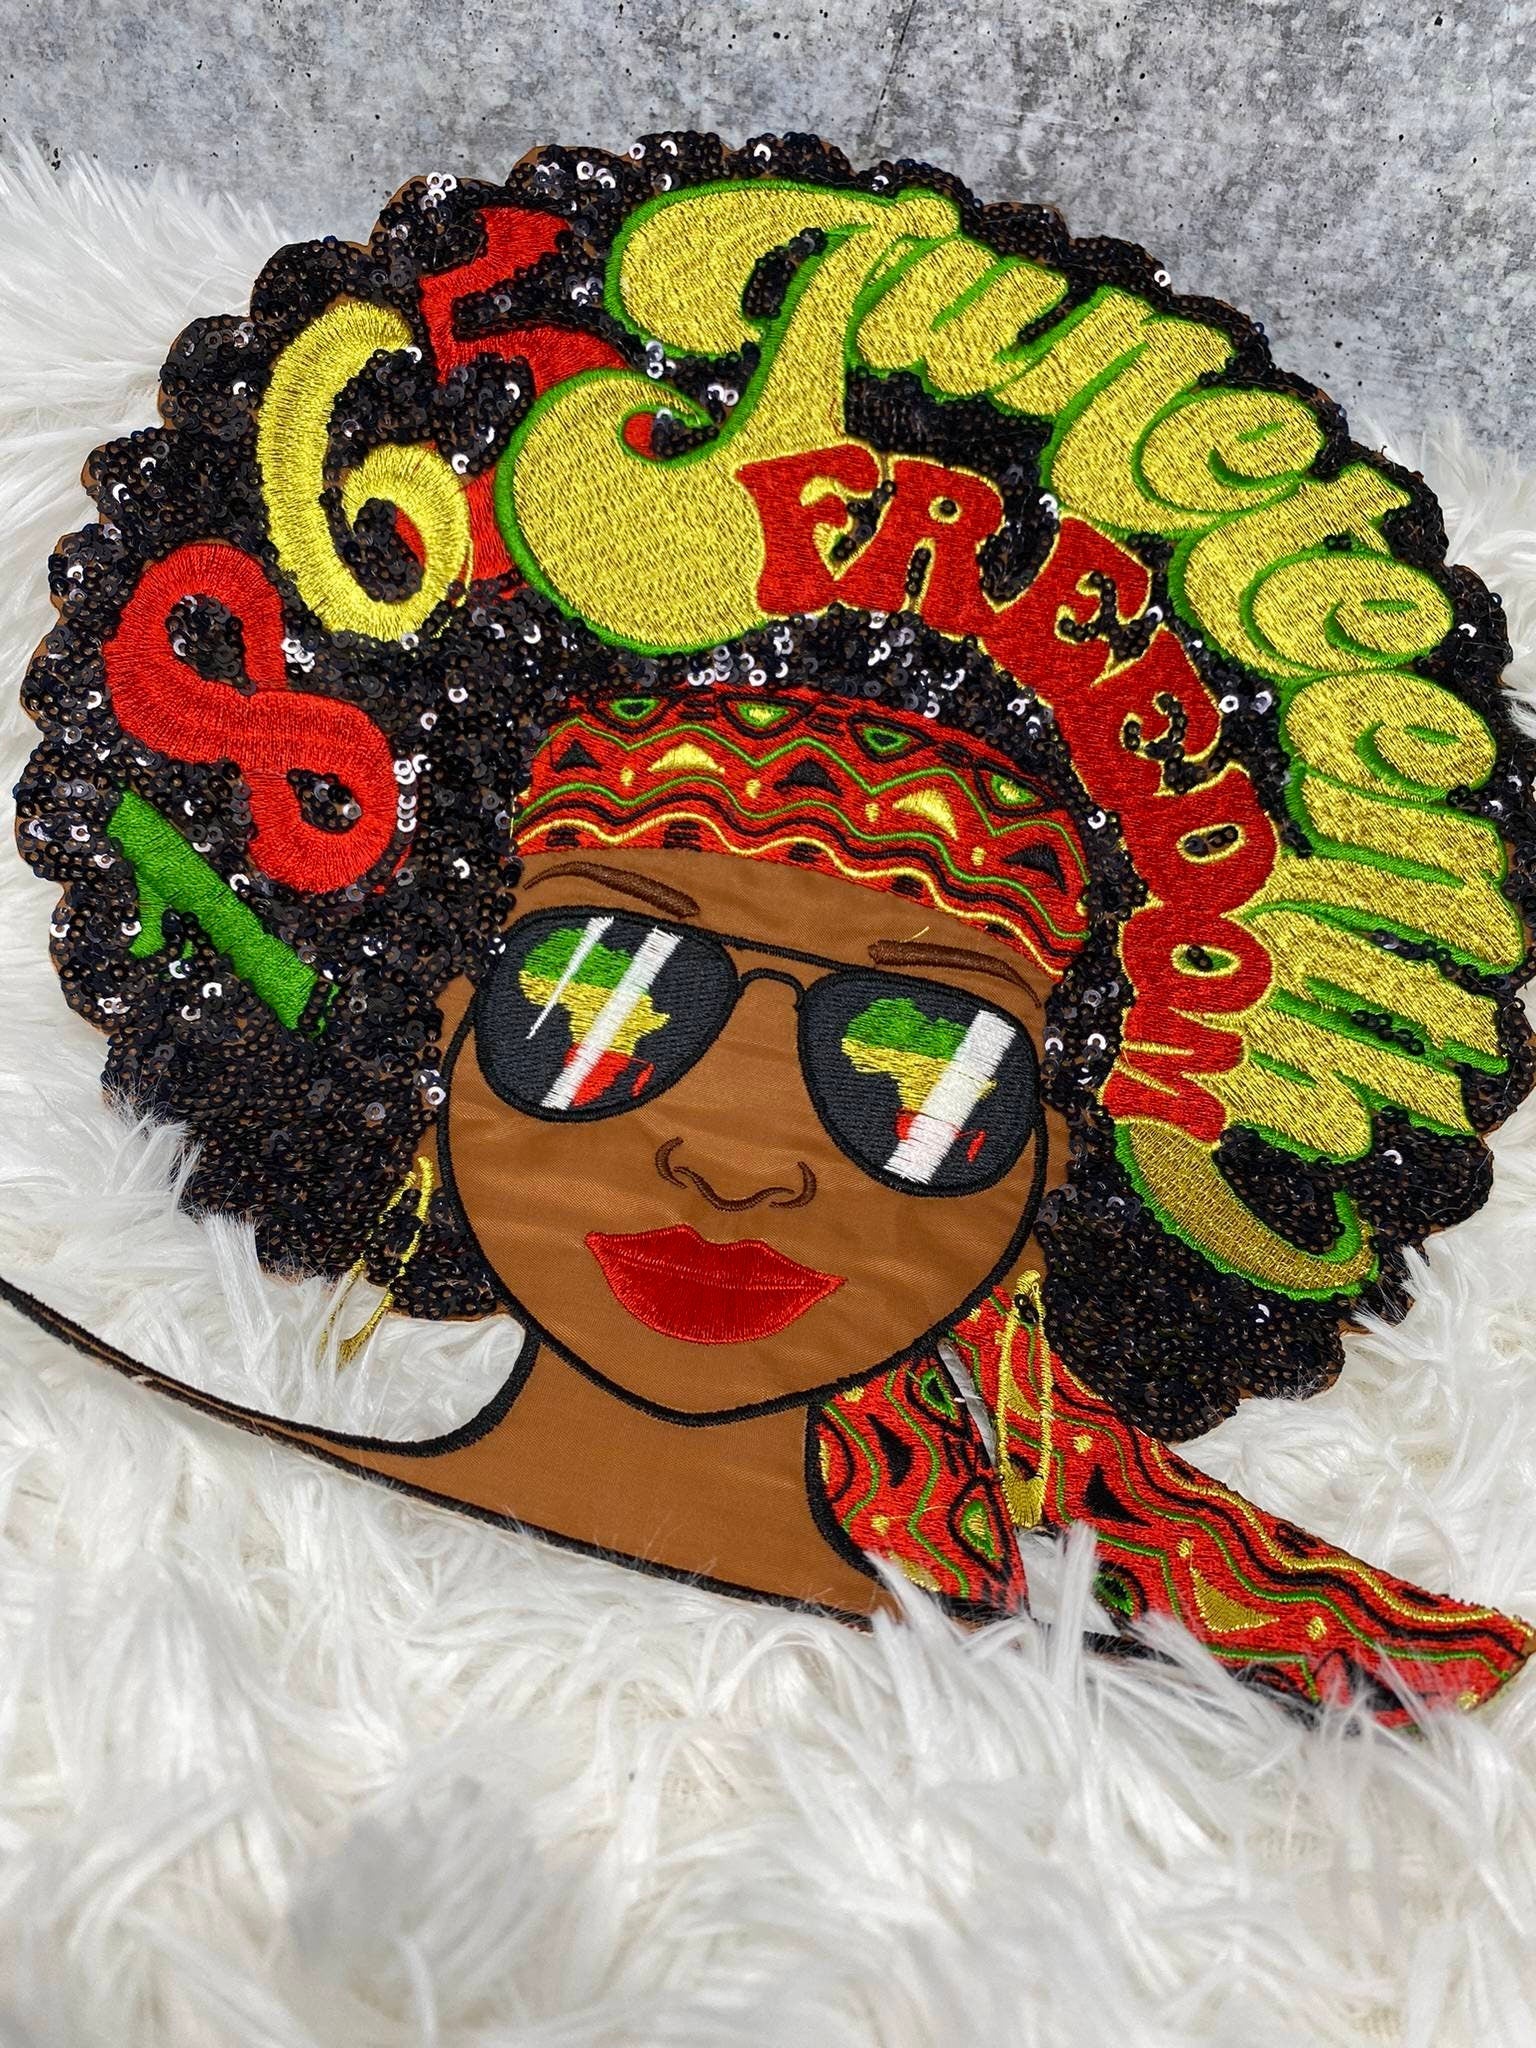 One-of-a-kind, 1865 Juneteenth 1-pc Iron-On "Afro Queen" Patch; Juneteenth Accessories for Clothing, Large Jacket Patch, Limited Edition